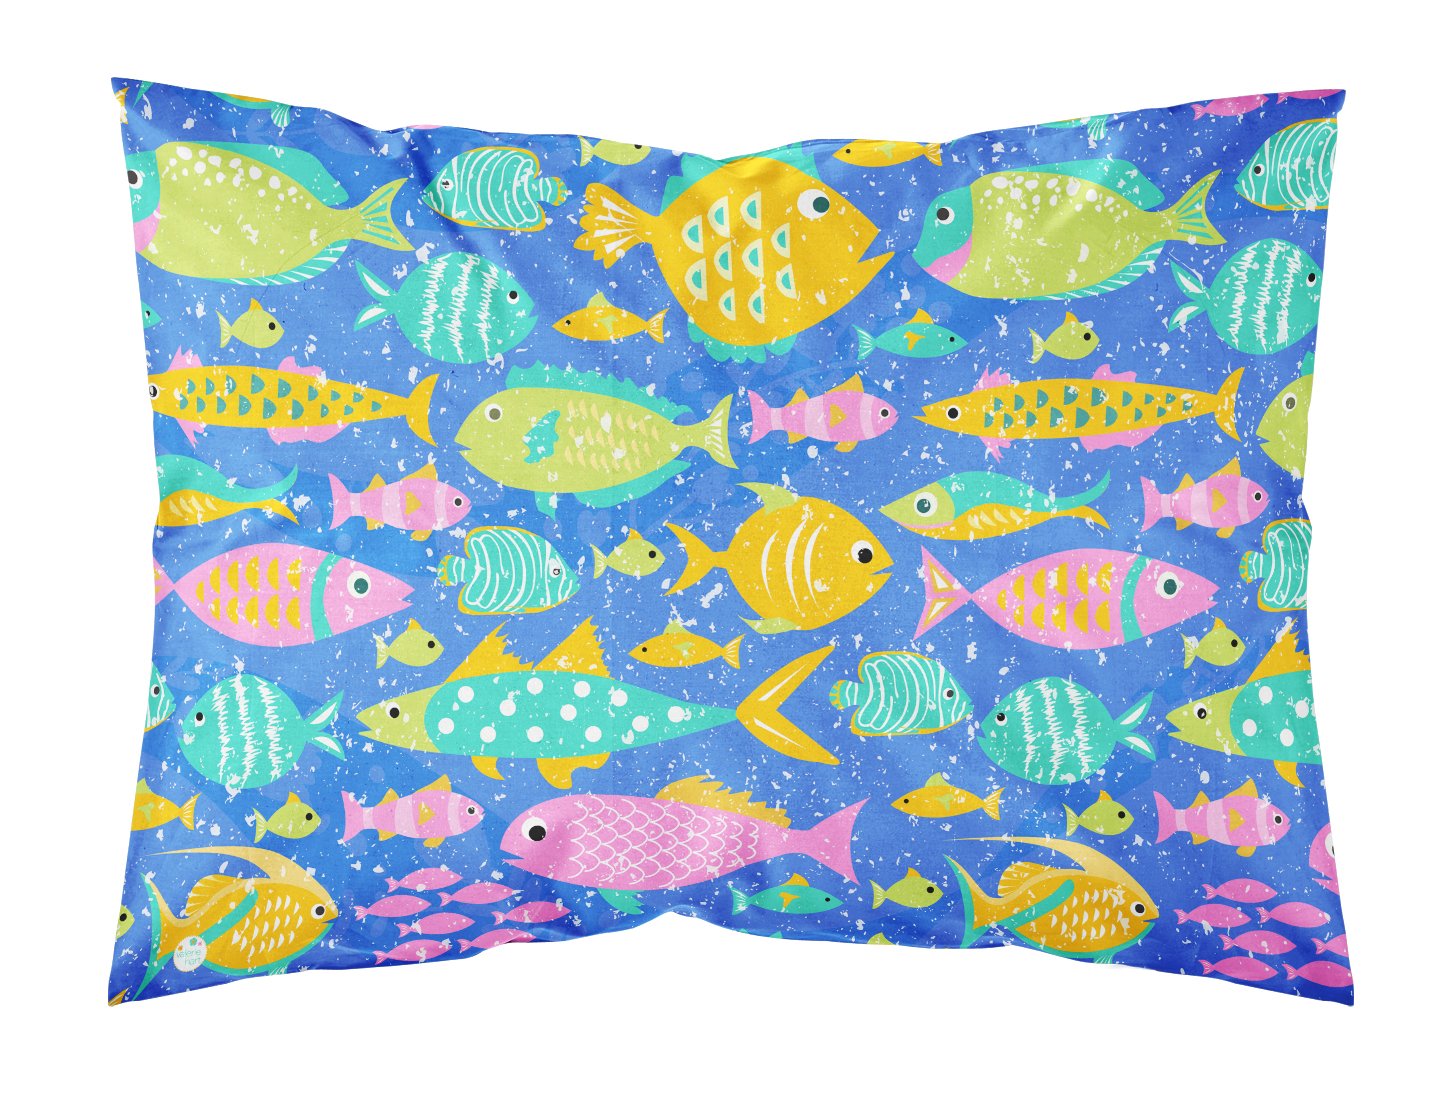 Little Colorful Fishes Fabric Standard Pillowcase VHA3034PILLOWCASE by Caroline's Treasures